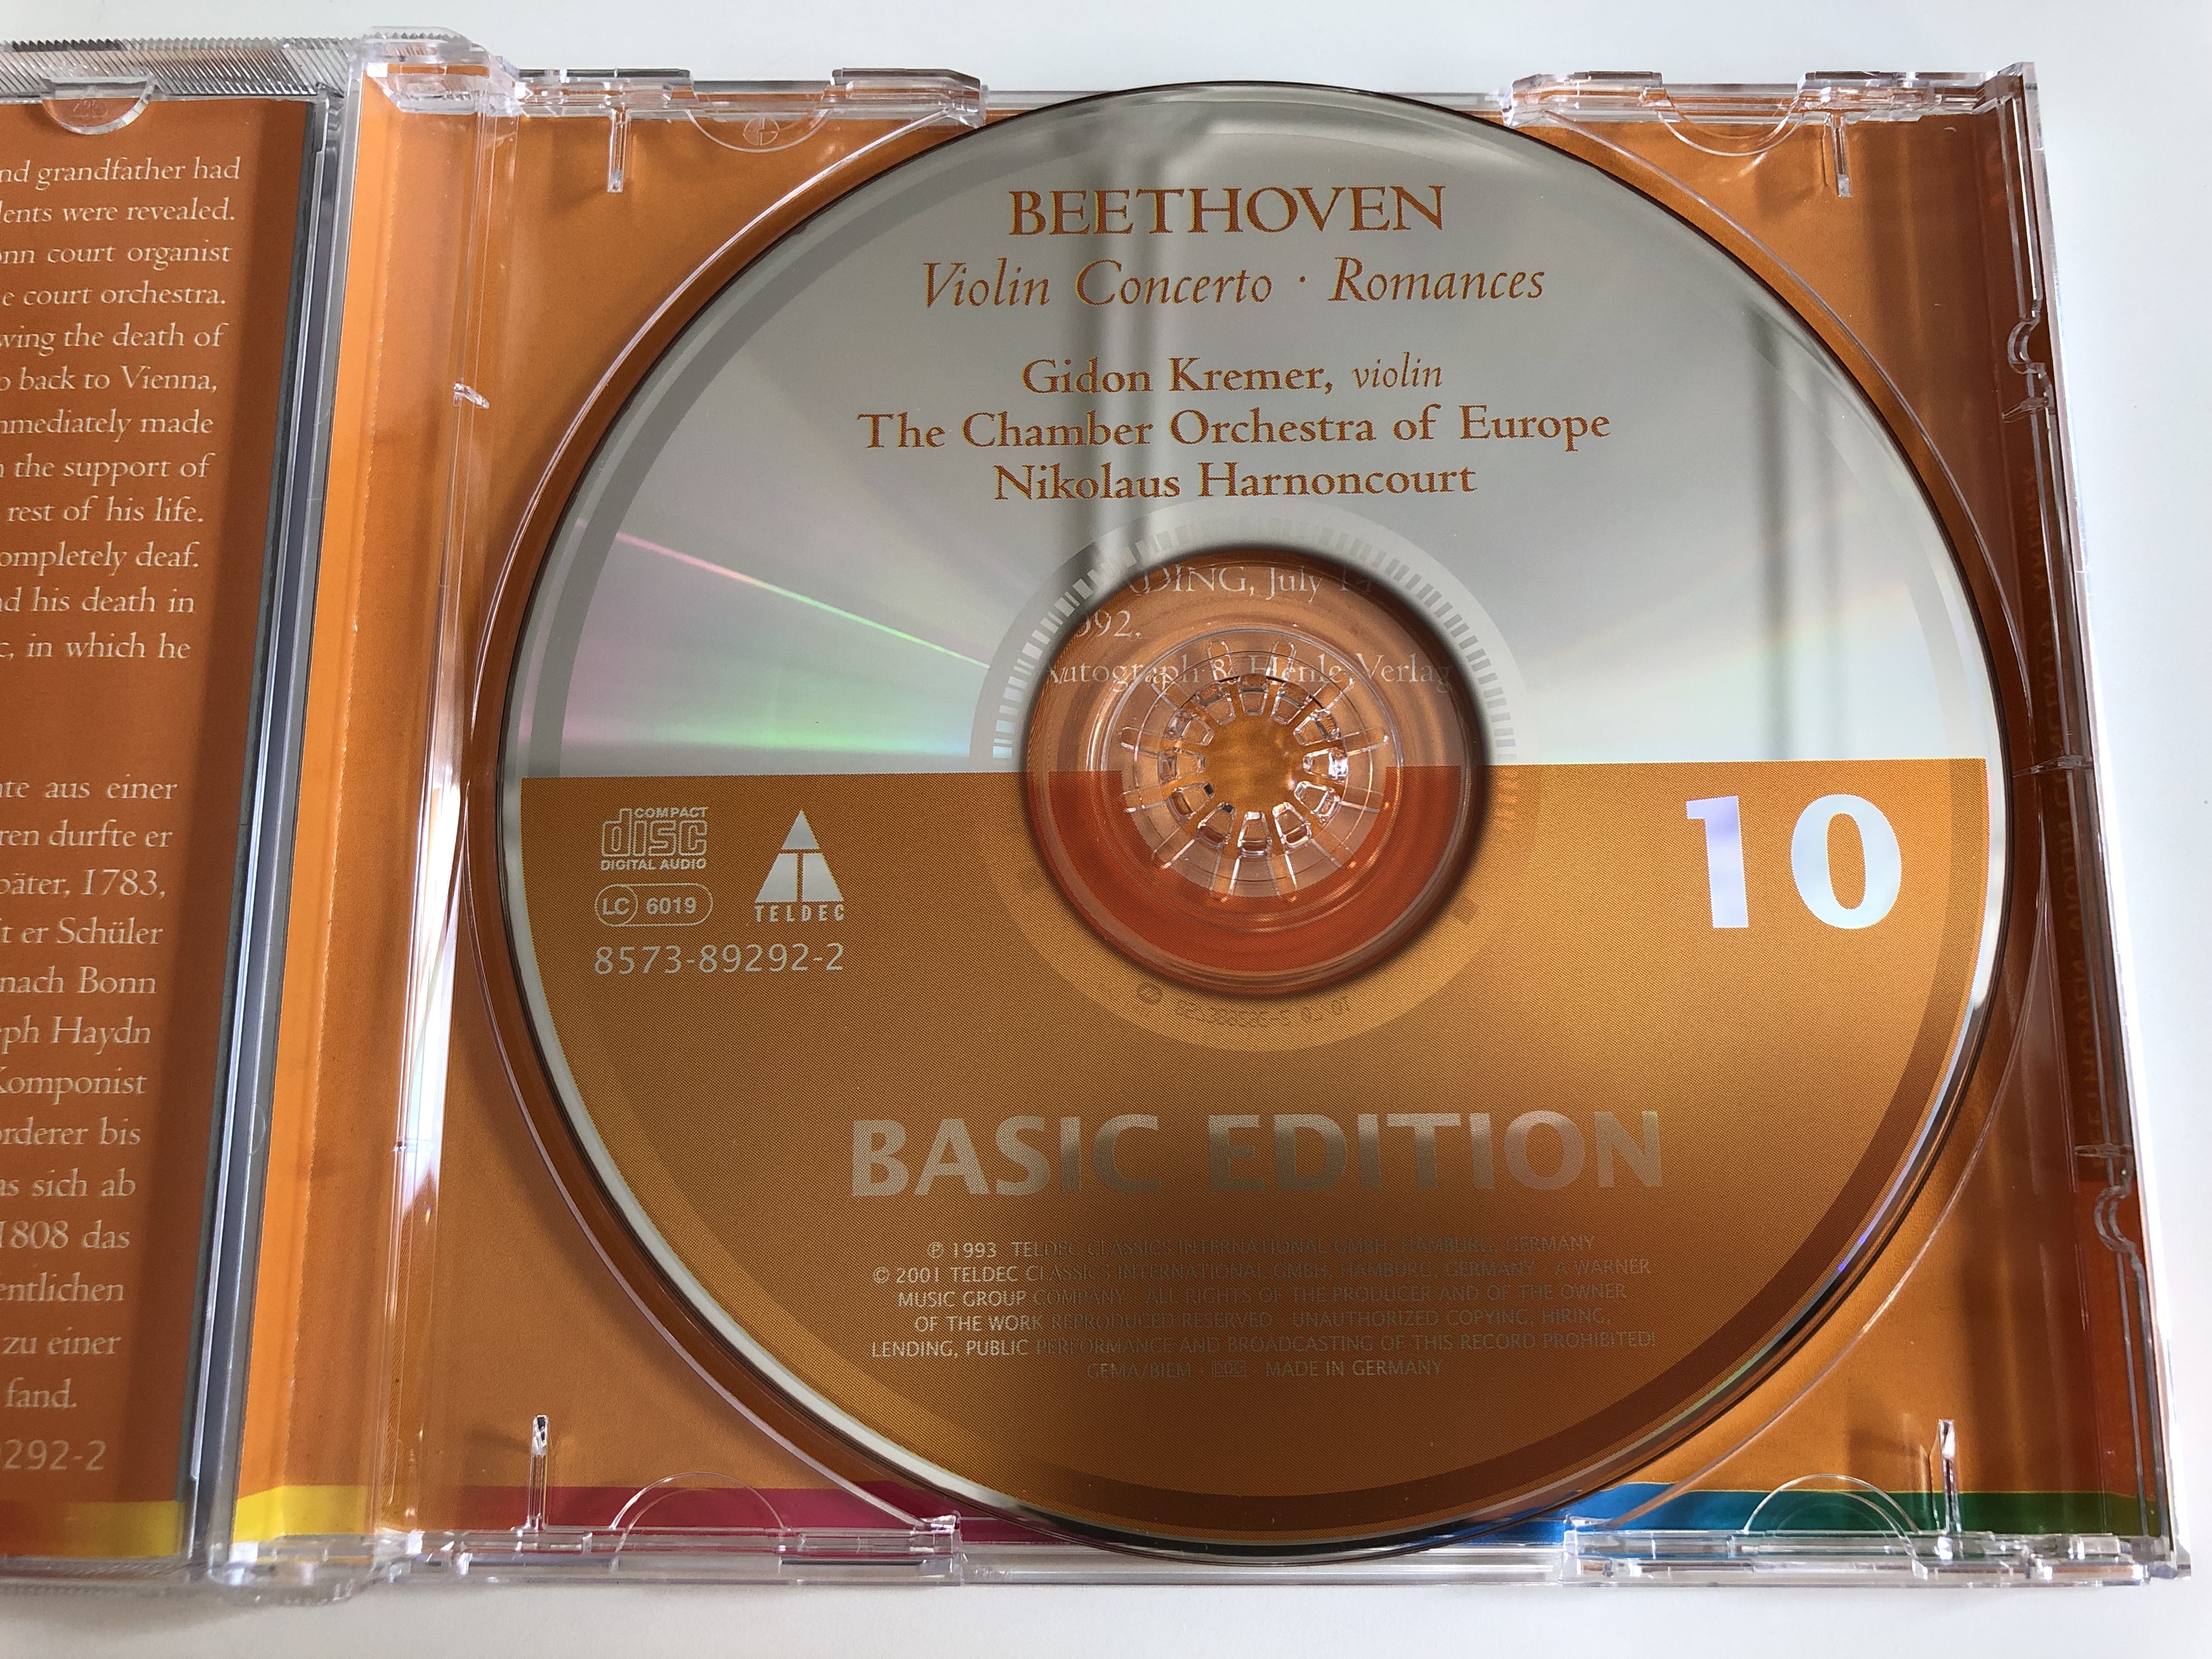 beethoven-violin-concerto-romances-gidon-kremer-the-chamber-orchestra-of-europe-conducted-by-nikolaus-harnoncourt-basic-edition-10-audio-cd-2001-4-.jpg